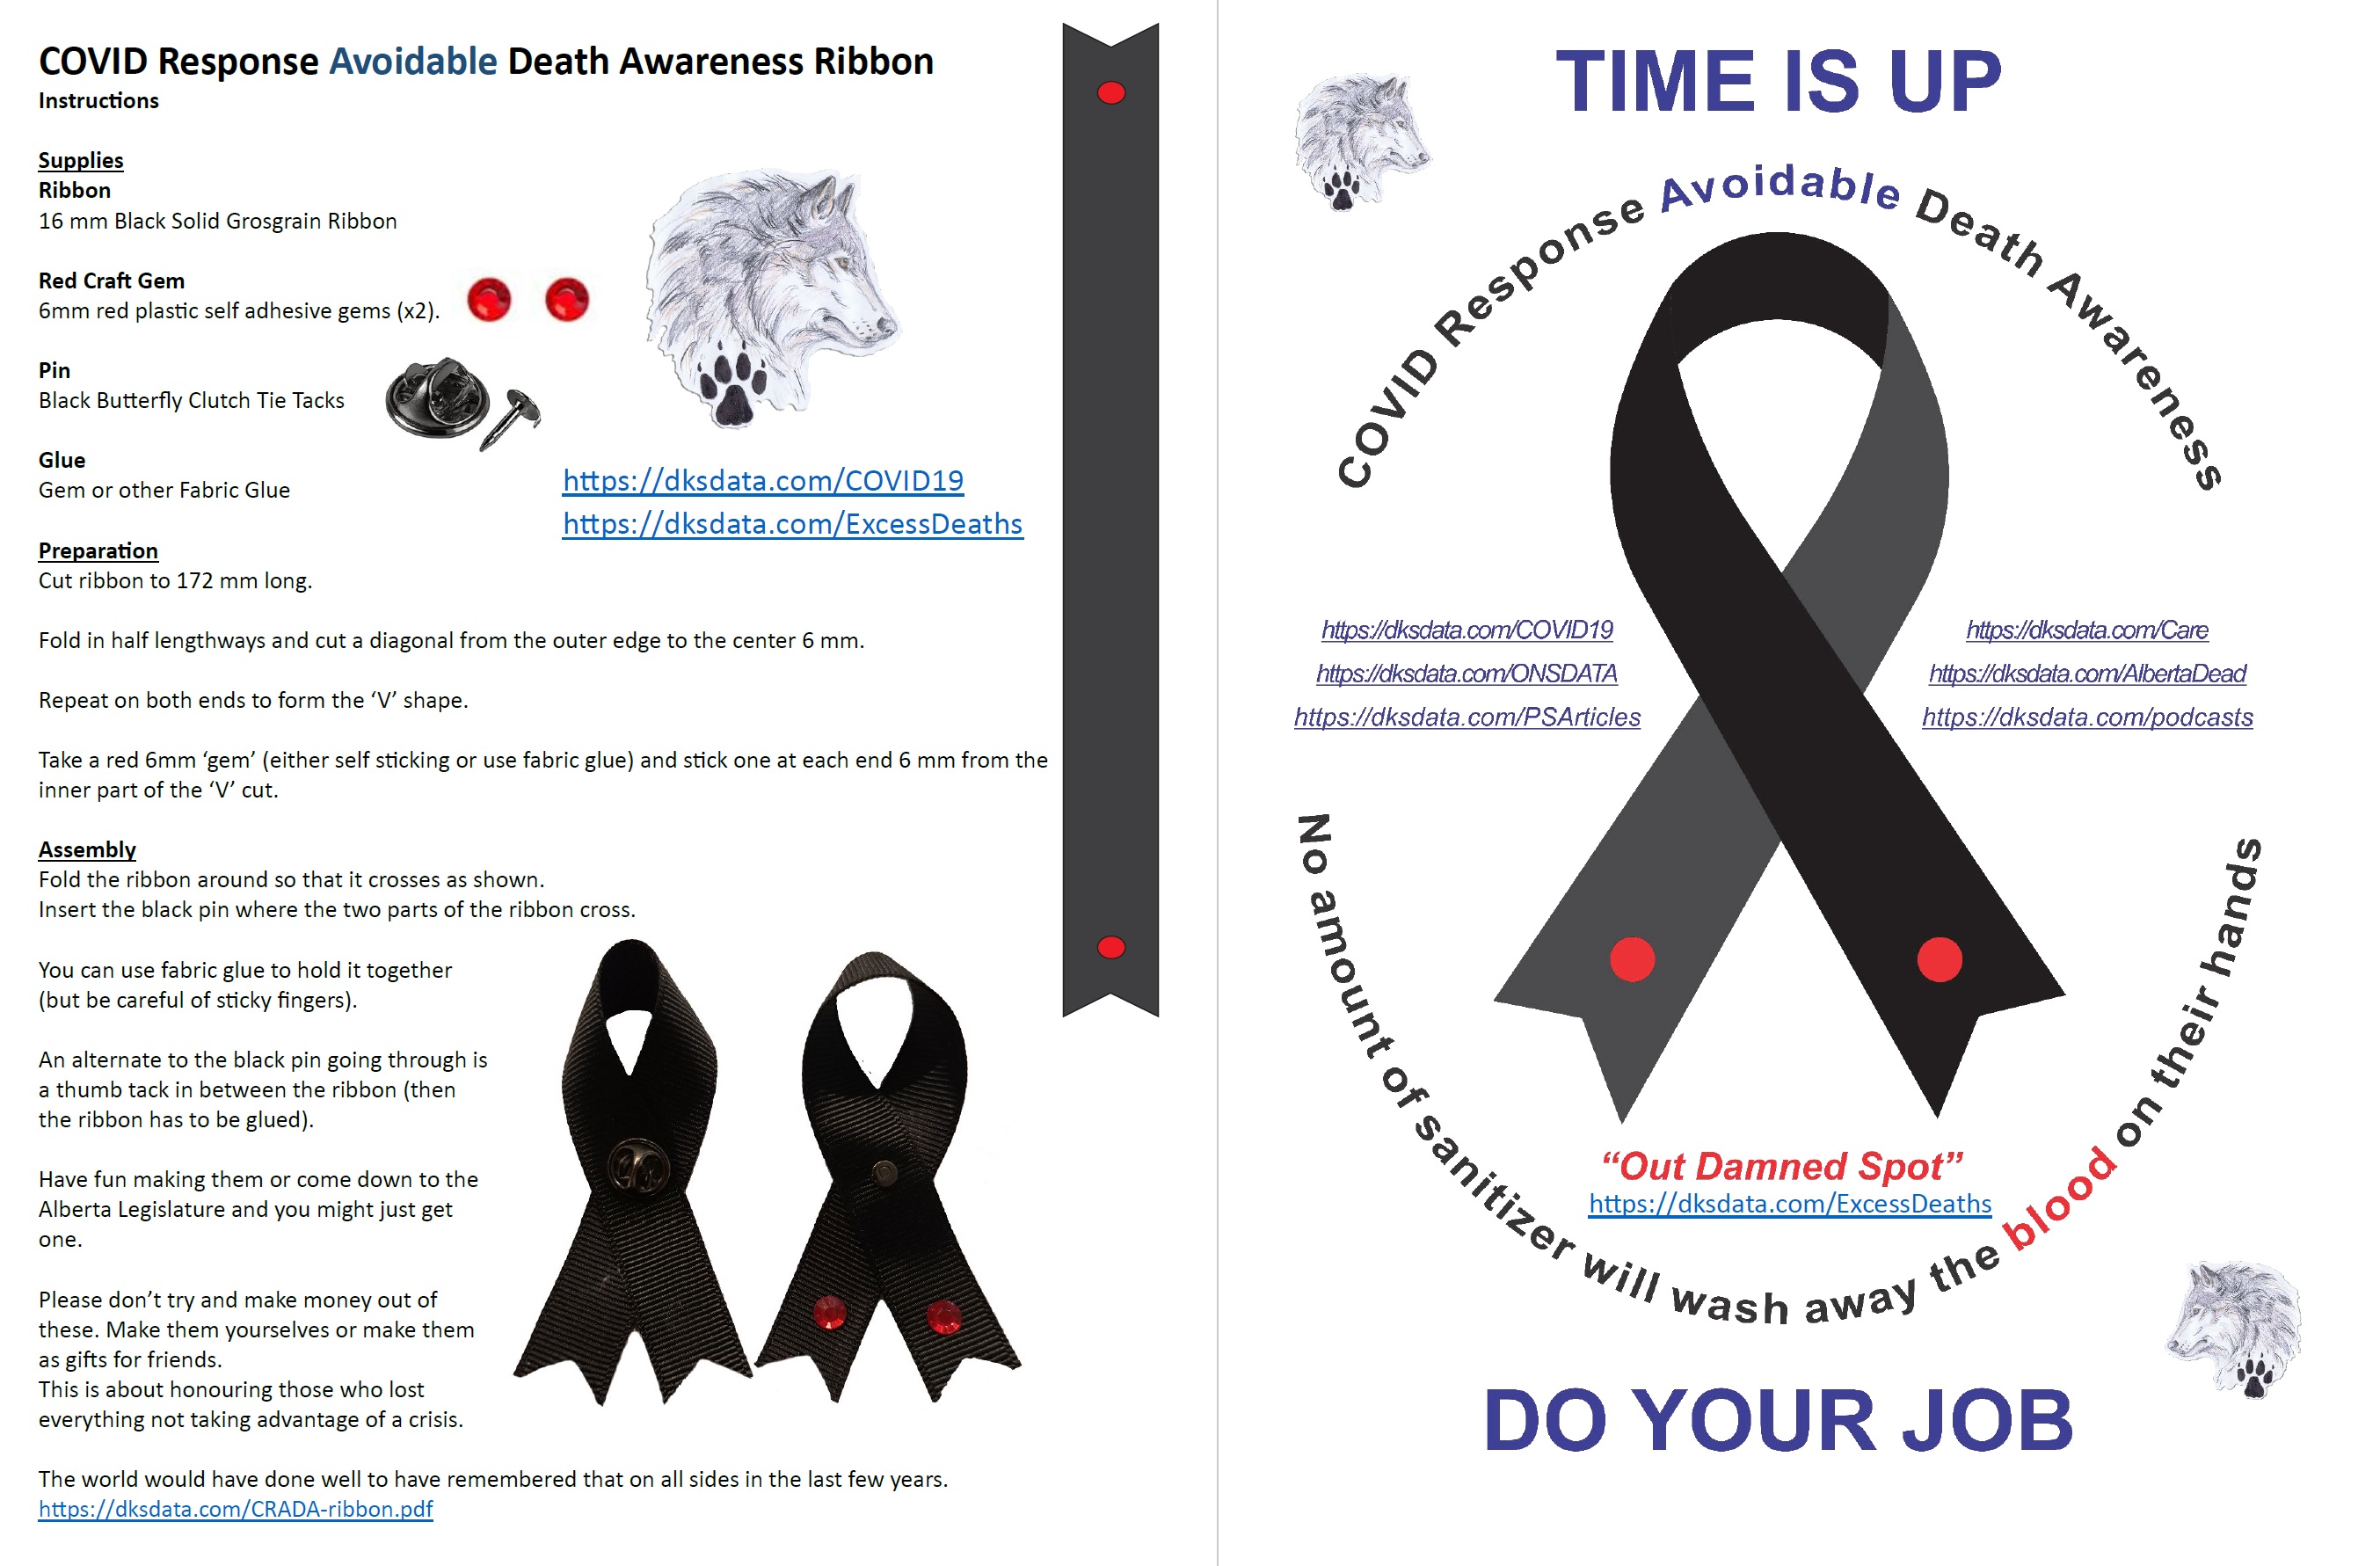 Covid Response Avoidable Deaths Awareness.